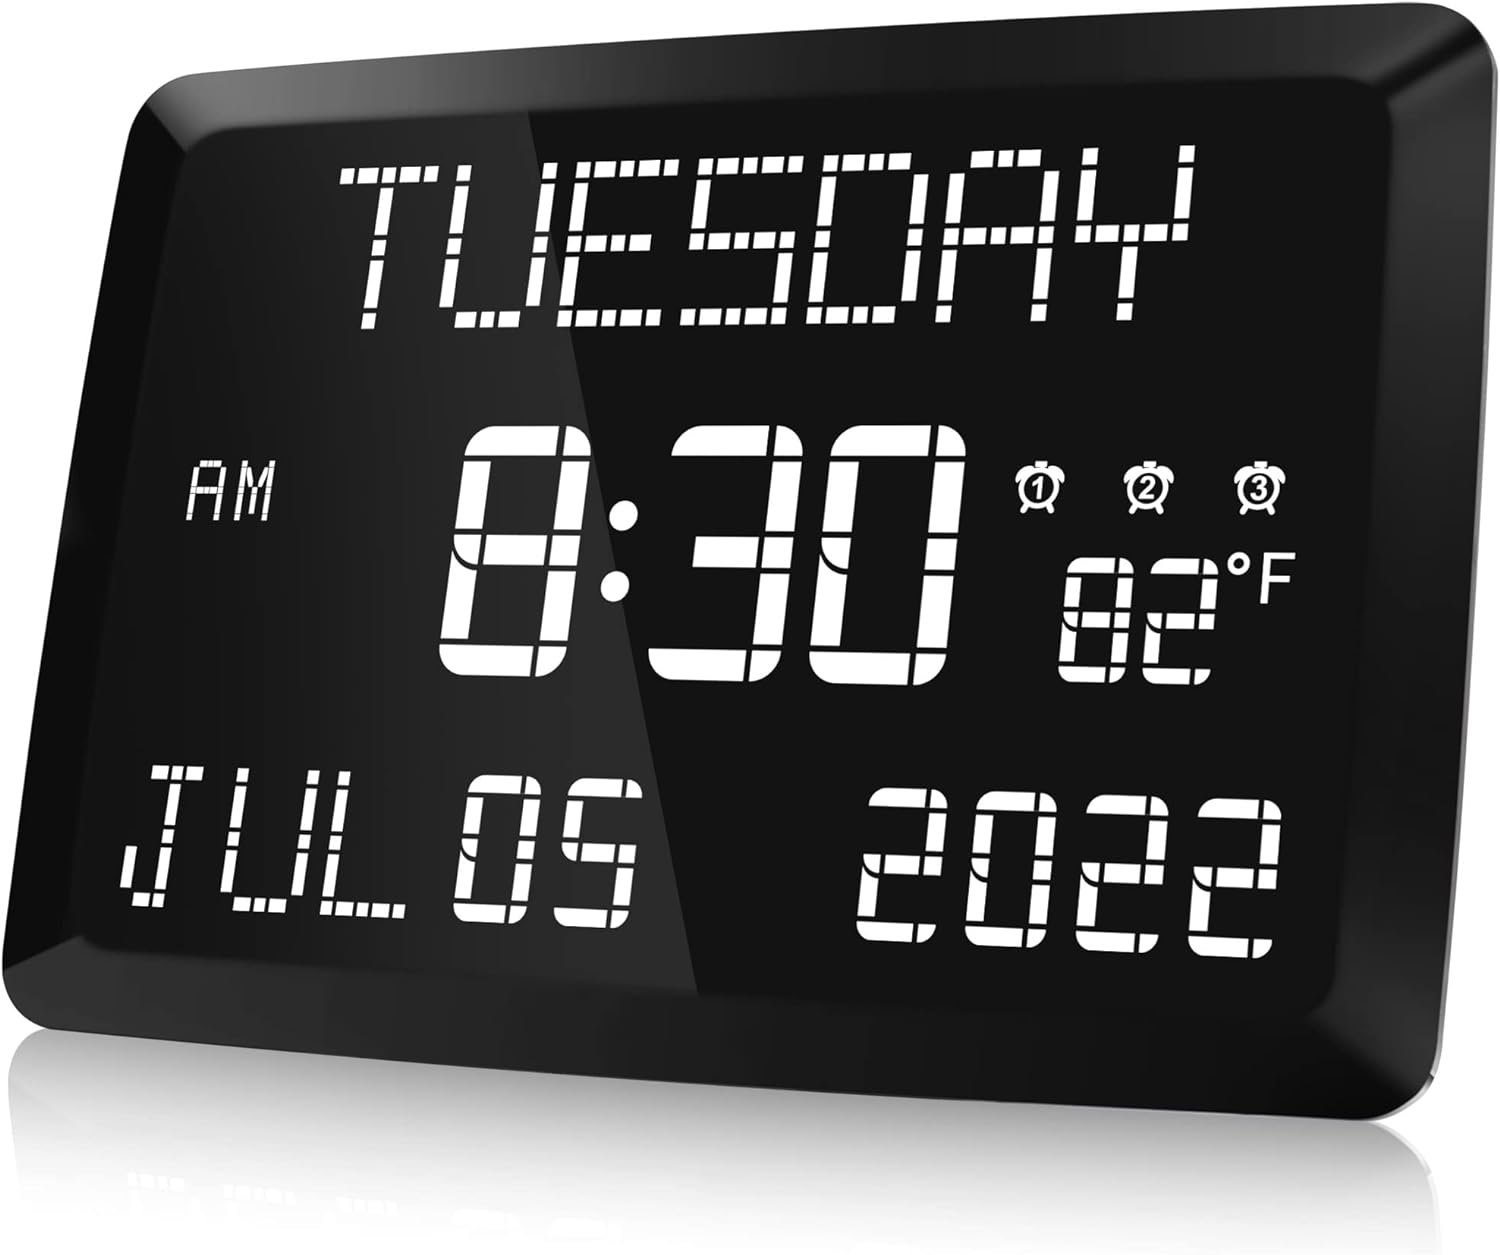 The Raynic Digital Clock has proven to be an invaluable addition to my mother-in-law' life in the nursing home. Designed with an 11.5-inch large LED word display, this clock provides a clear and easily readable interface that has significantly helped her in managing her dementia and maintaining a sense of time and orientation. It has become an essential tool in her daily routine, earning a well-deserved five-star rating.The standout feature of the Raynic Digital Clock is its bright and easily v